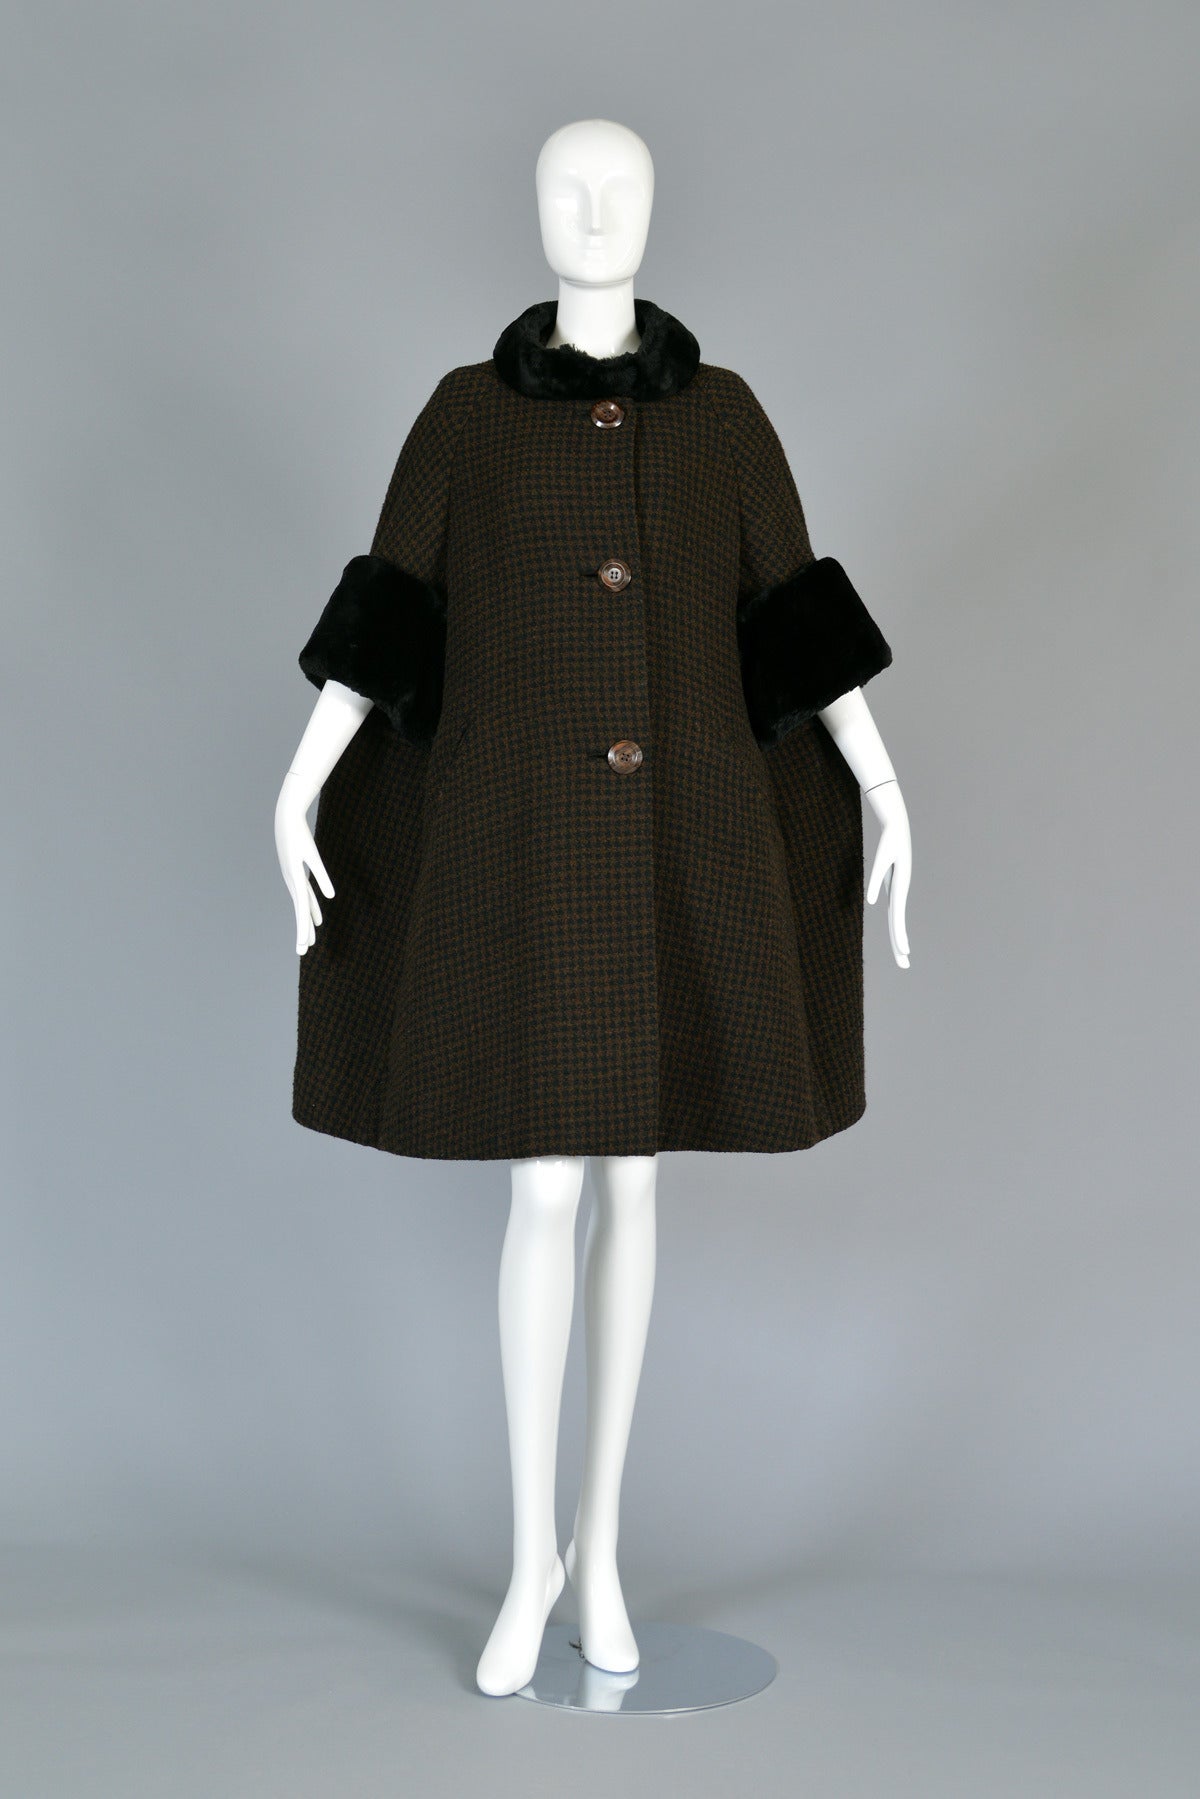 Ultra lovely vintage 1950s nutmeg and black checked wool swing coat. Such an amazing find! Incredible bell-shaped swing cut with button front and besom pockets. Ultra short sheared beaver sleeves and tab collar. Pristine vintage